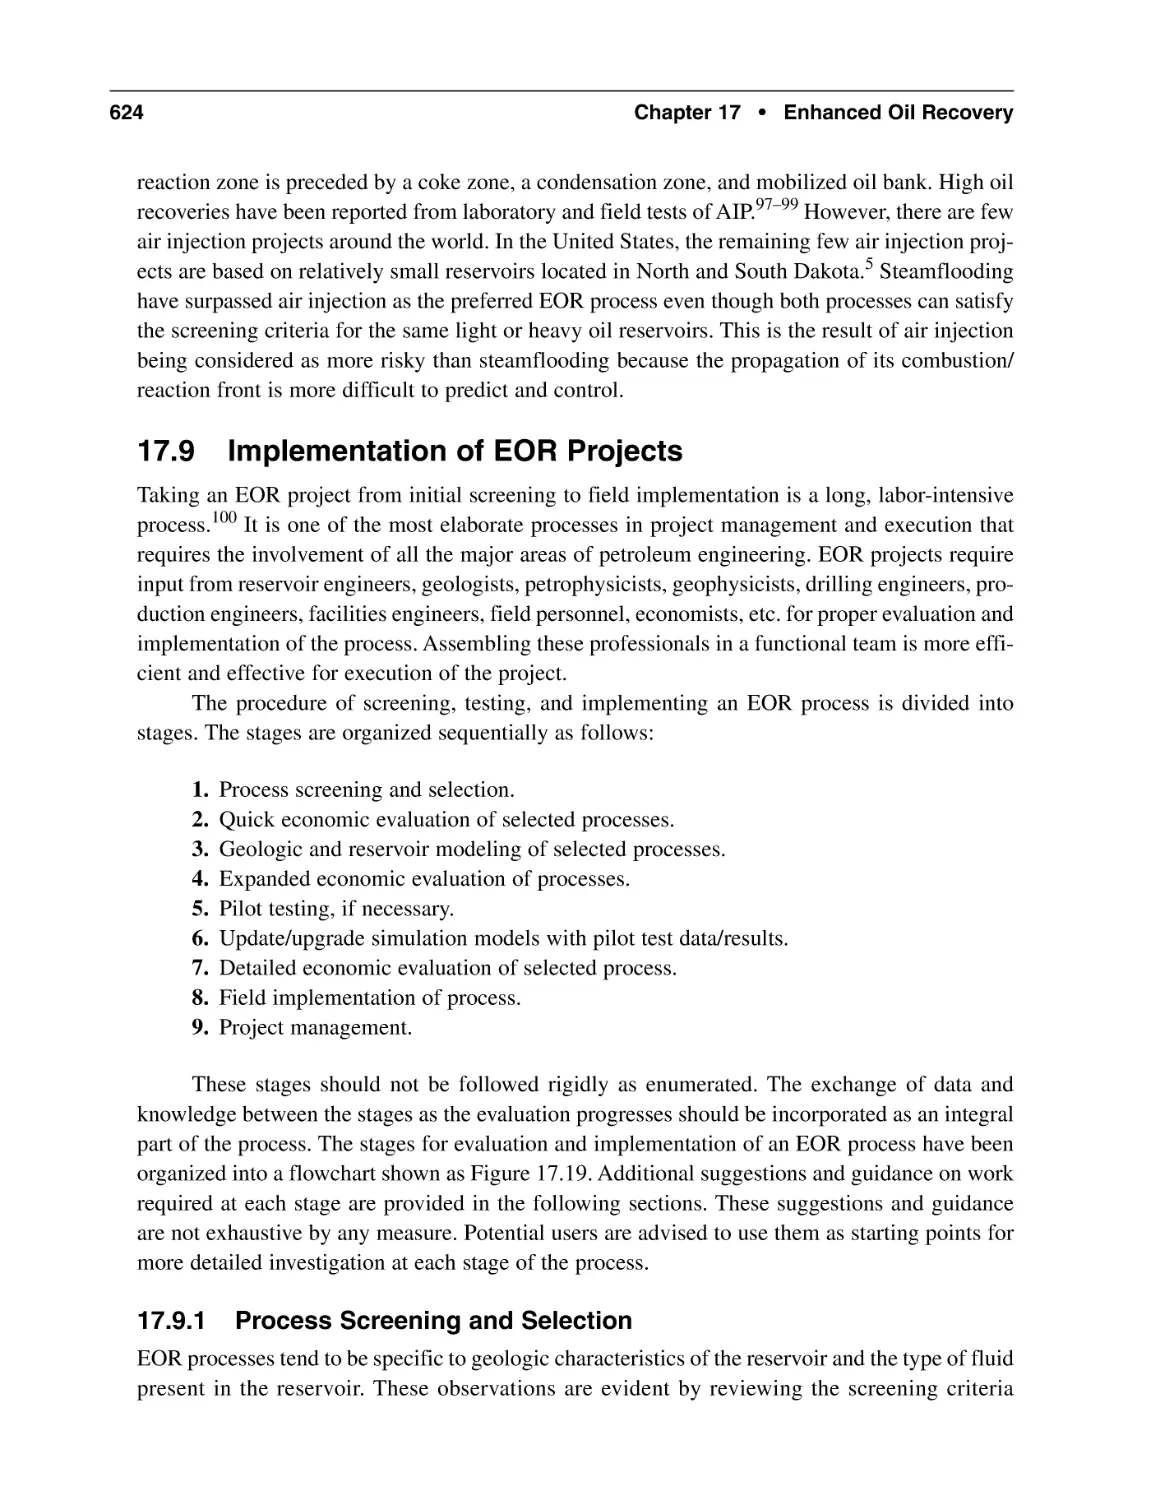 17.9 Implementation of EOR Projects
17.9.1 Process Screening and Selection